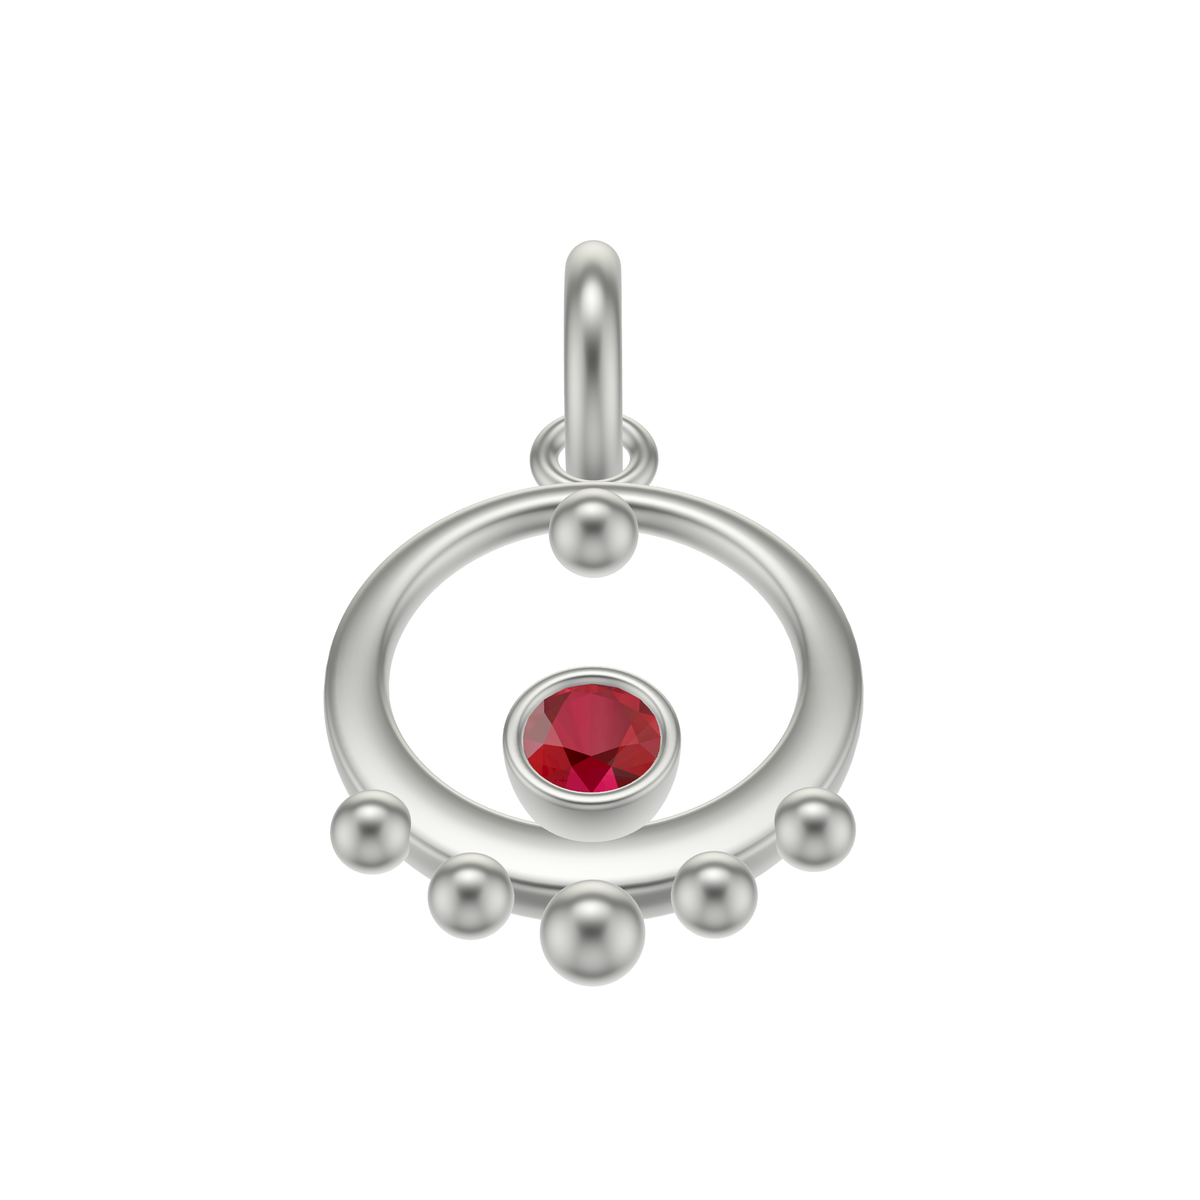 Mothers Circle Framed Charm | Silver Pendant With Granules, Small | Choose Your Gemstone